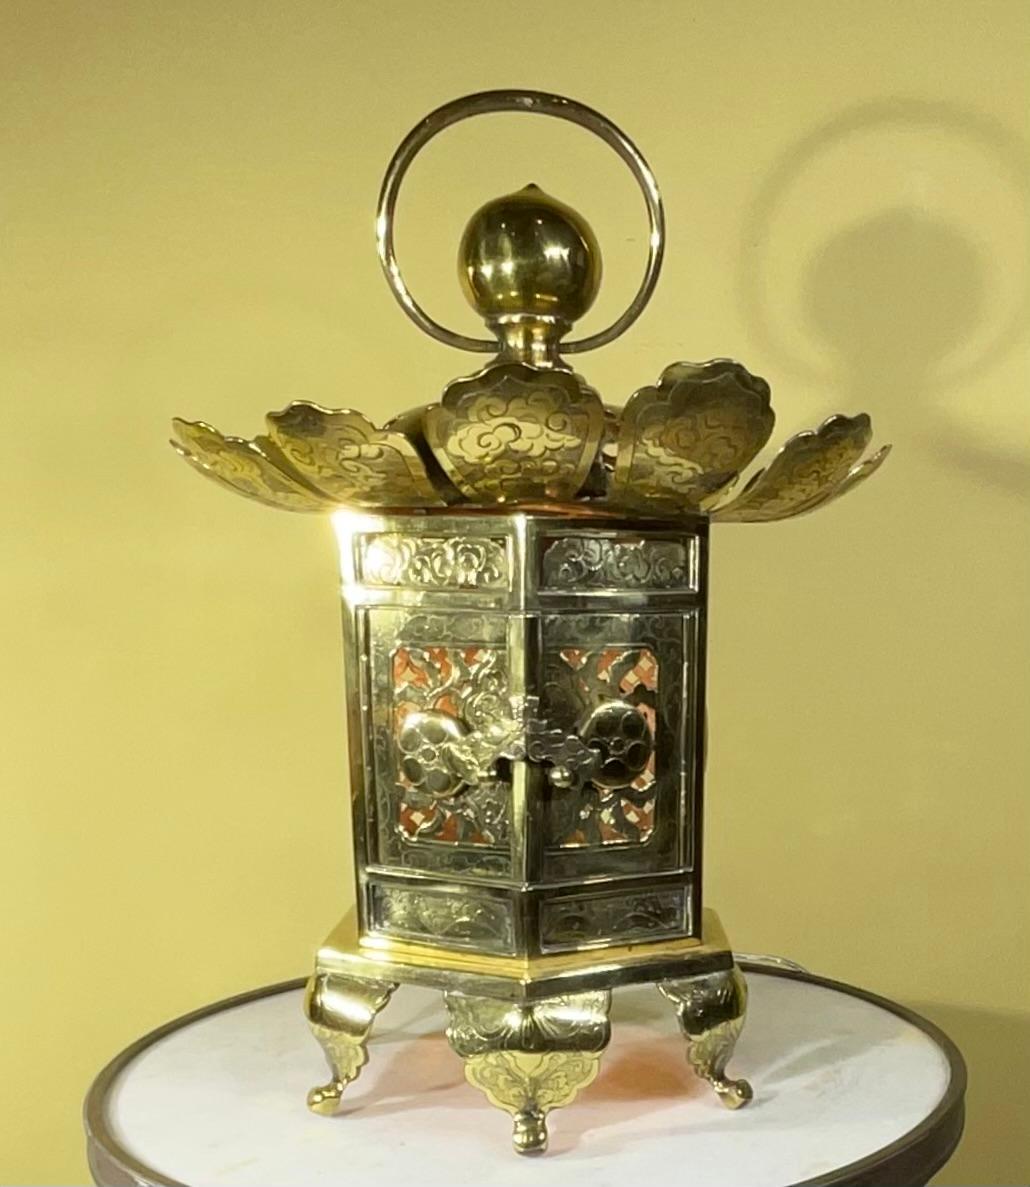 Beautiful hand forged brass Japanese lantern. Electrified with one 60/watt light 
Decorative as table lamp or even as Center piece without the light.
Great detailed and vivid engraved Japanese motifs 
